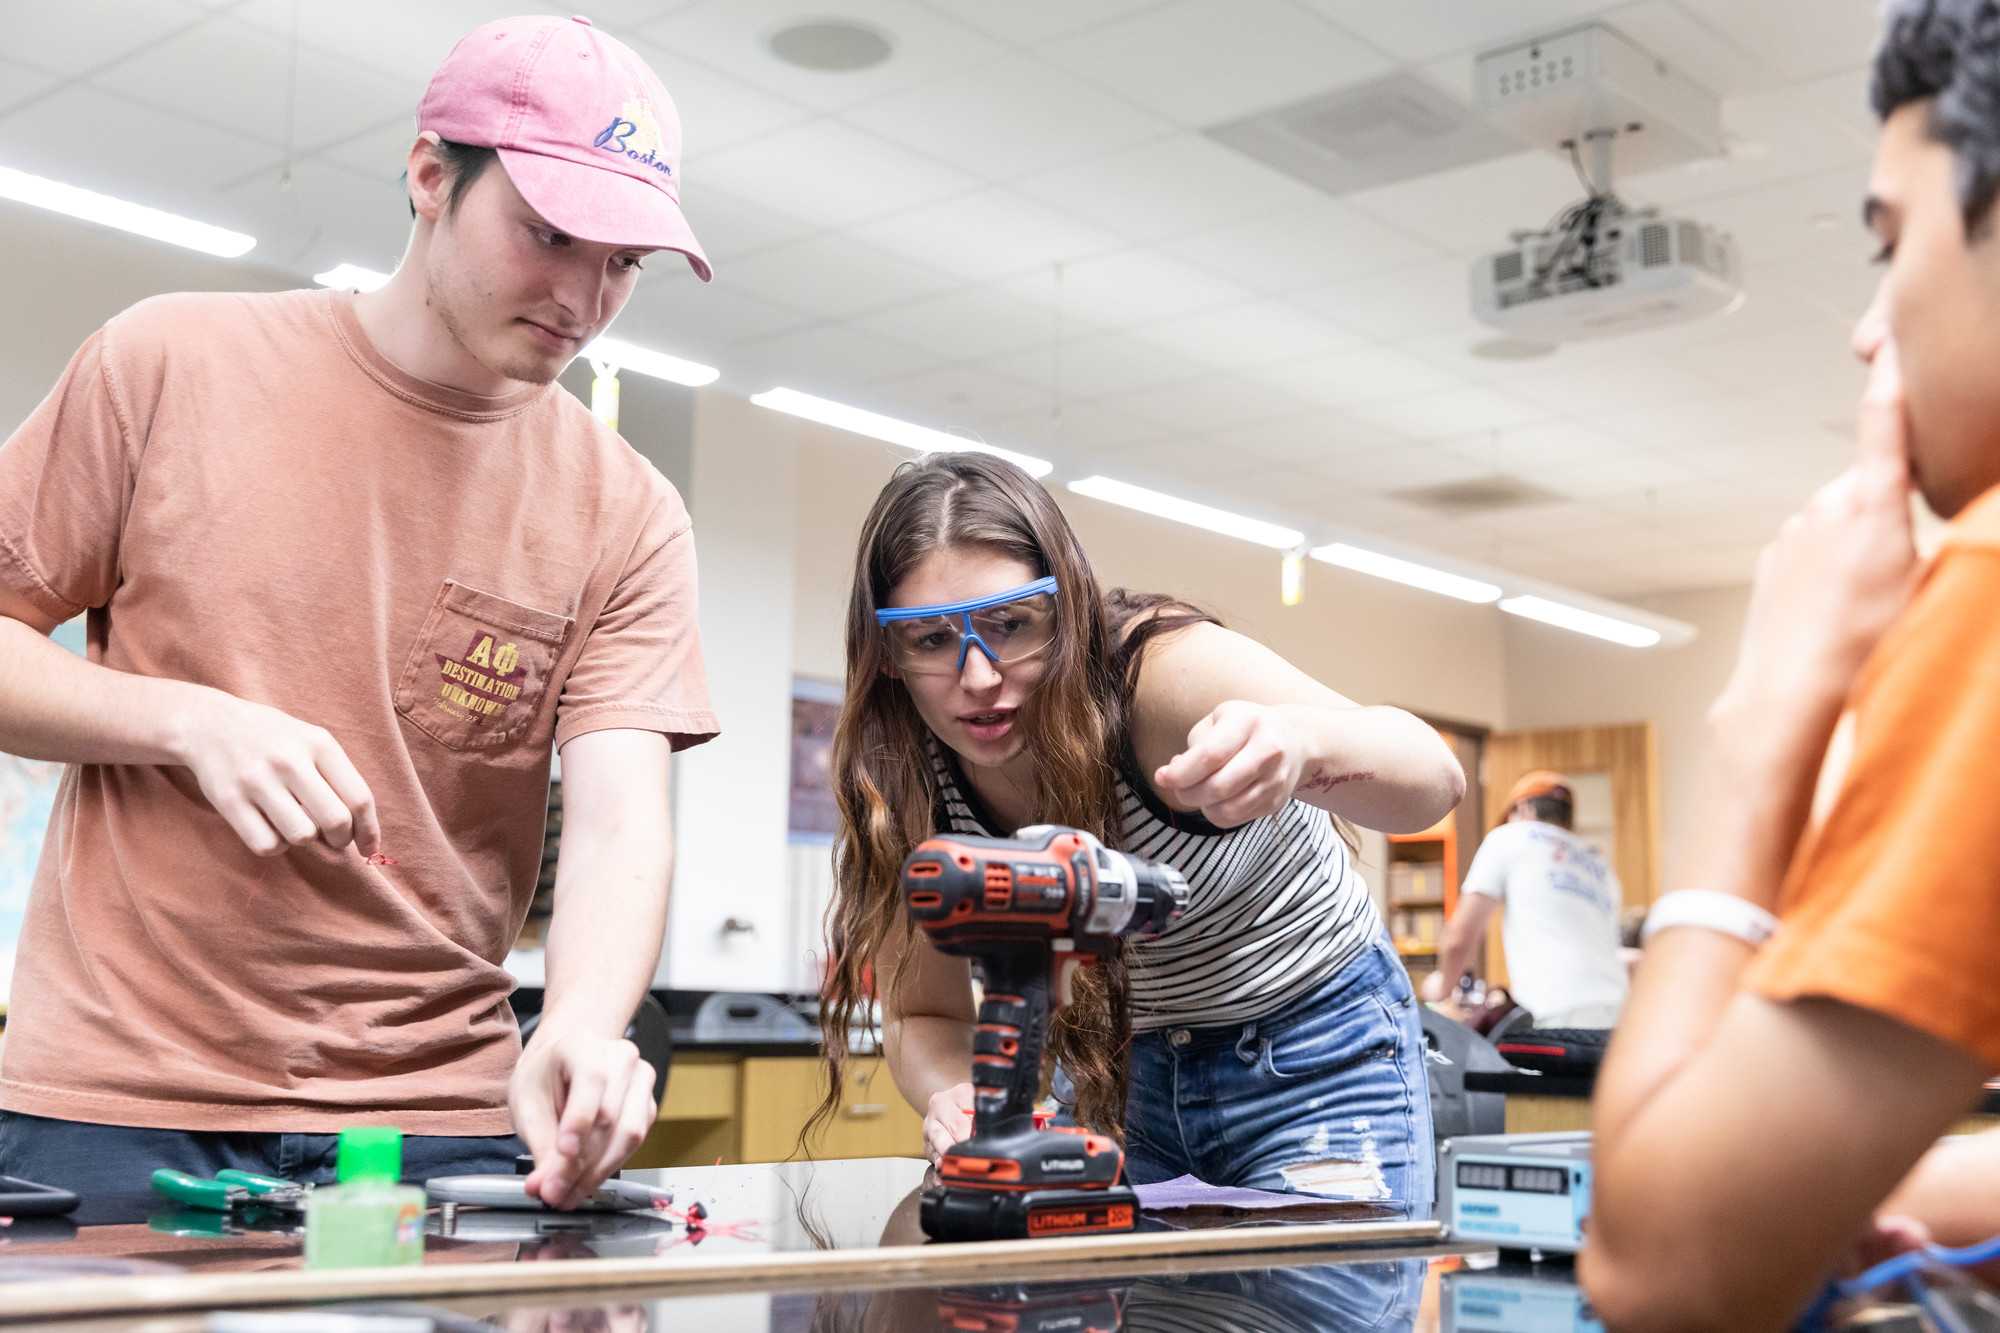 ACC Engineering students get hands on experience in this intensive associate degree program that prepares students for transfer to four-year universities.